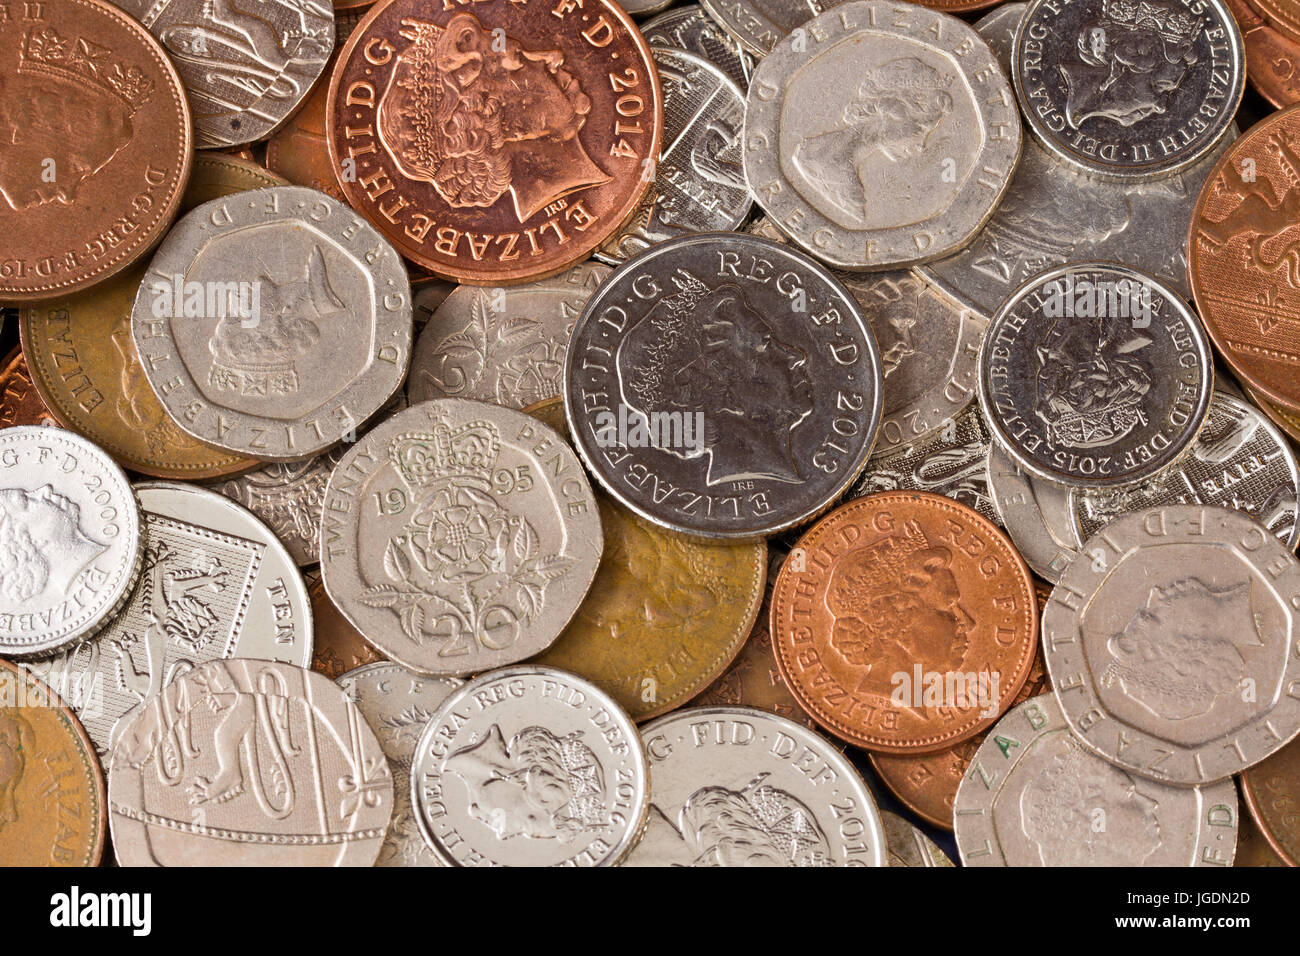 British English sterling coins selection, UK currency Stock Photo